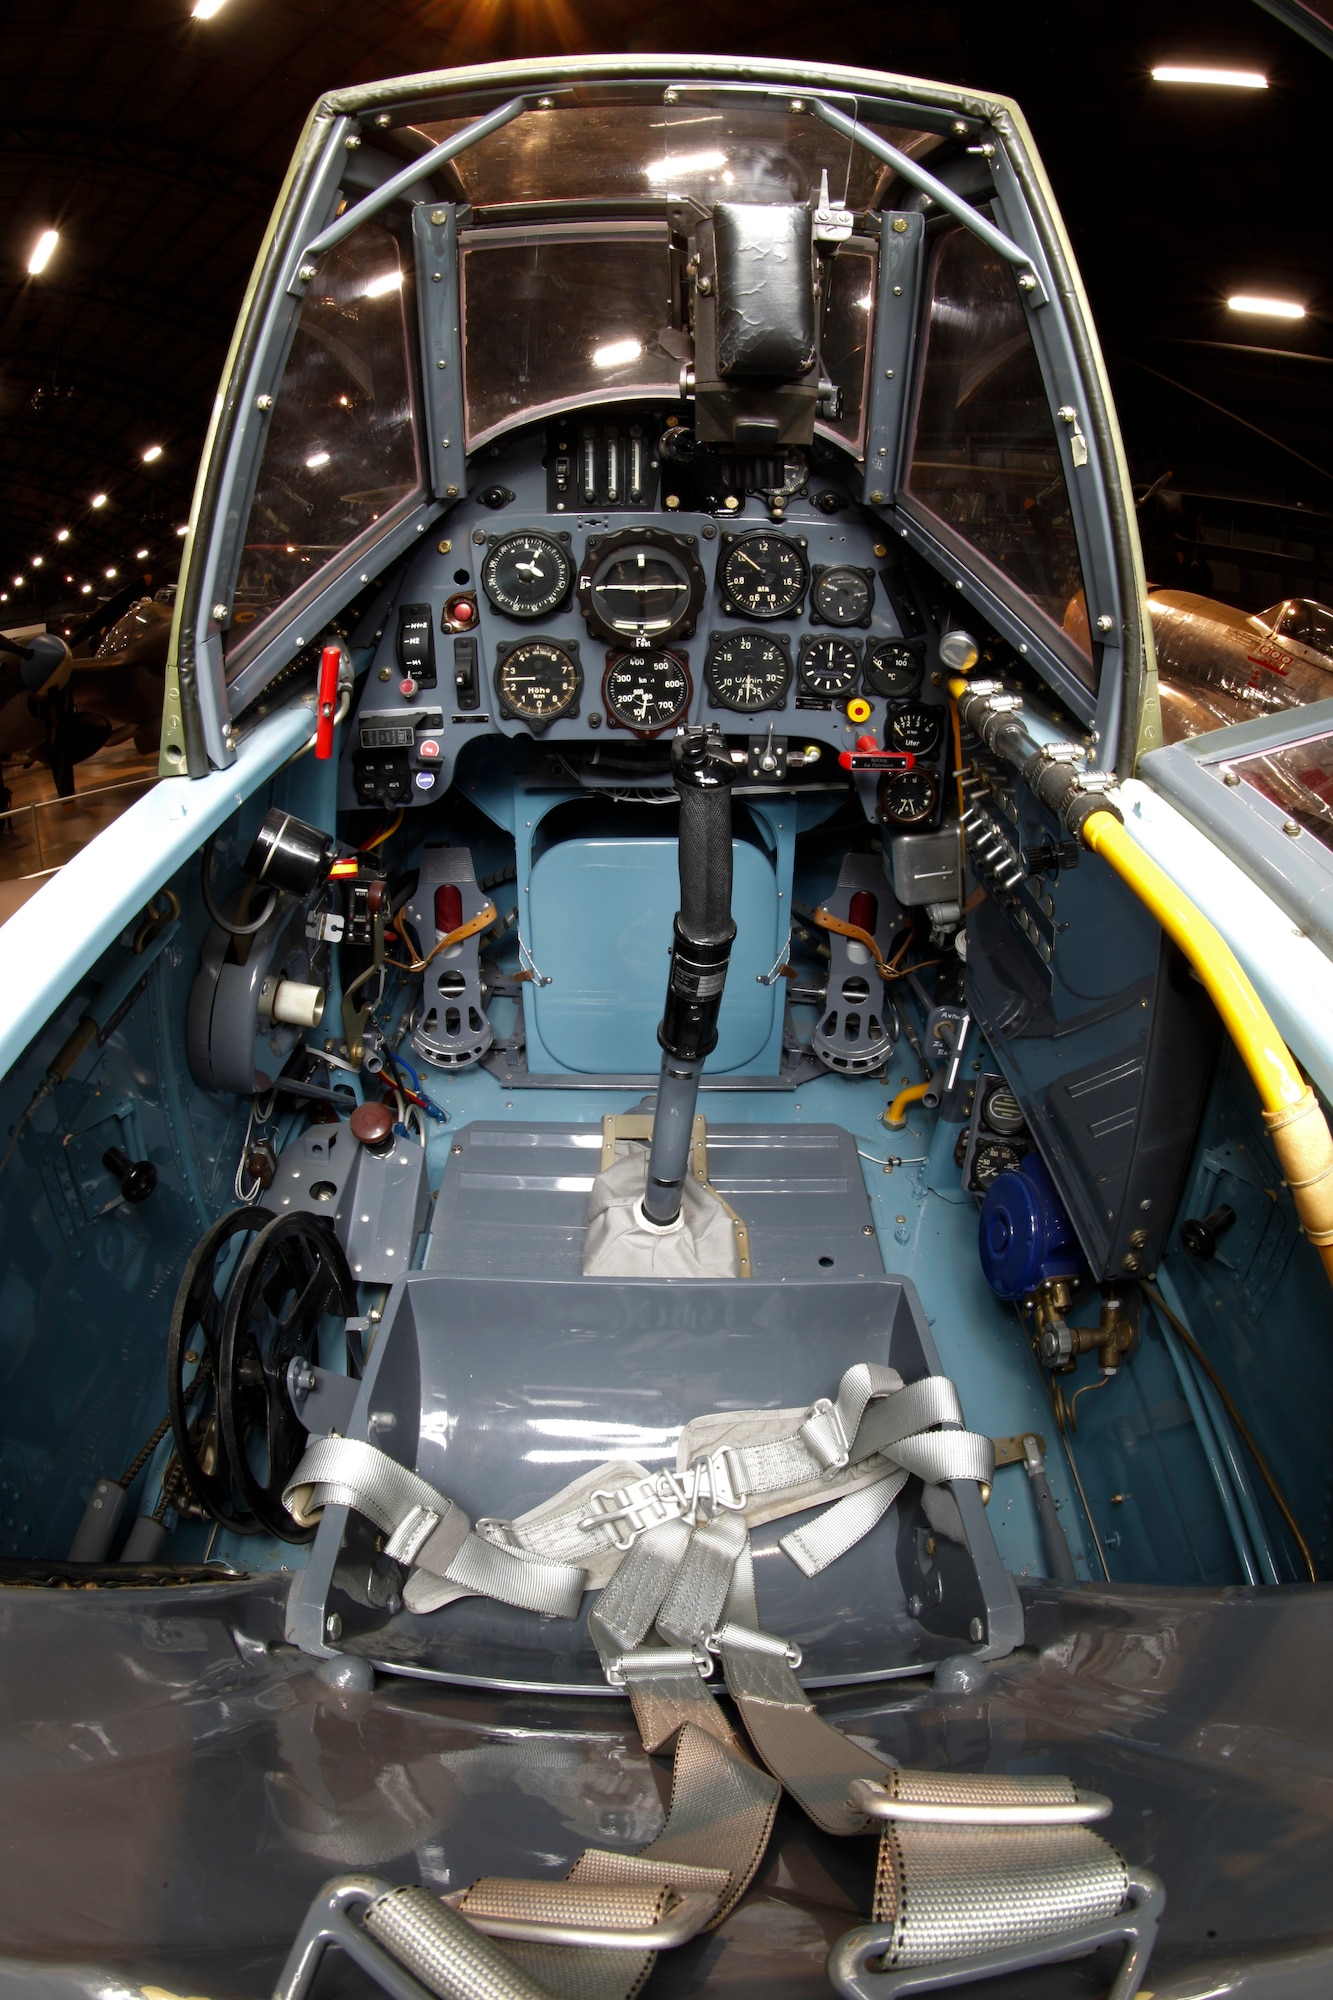 Cockpit view of the Messerschmitt Bf 109G-10 in the National Museum of the U.S. Air Force World War II Gallery.